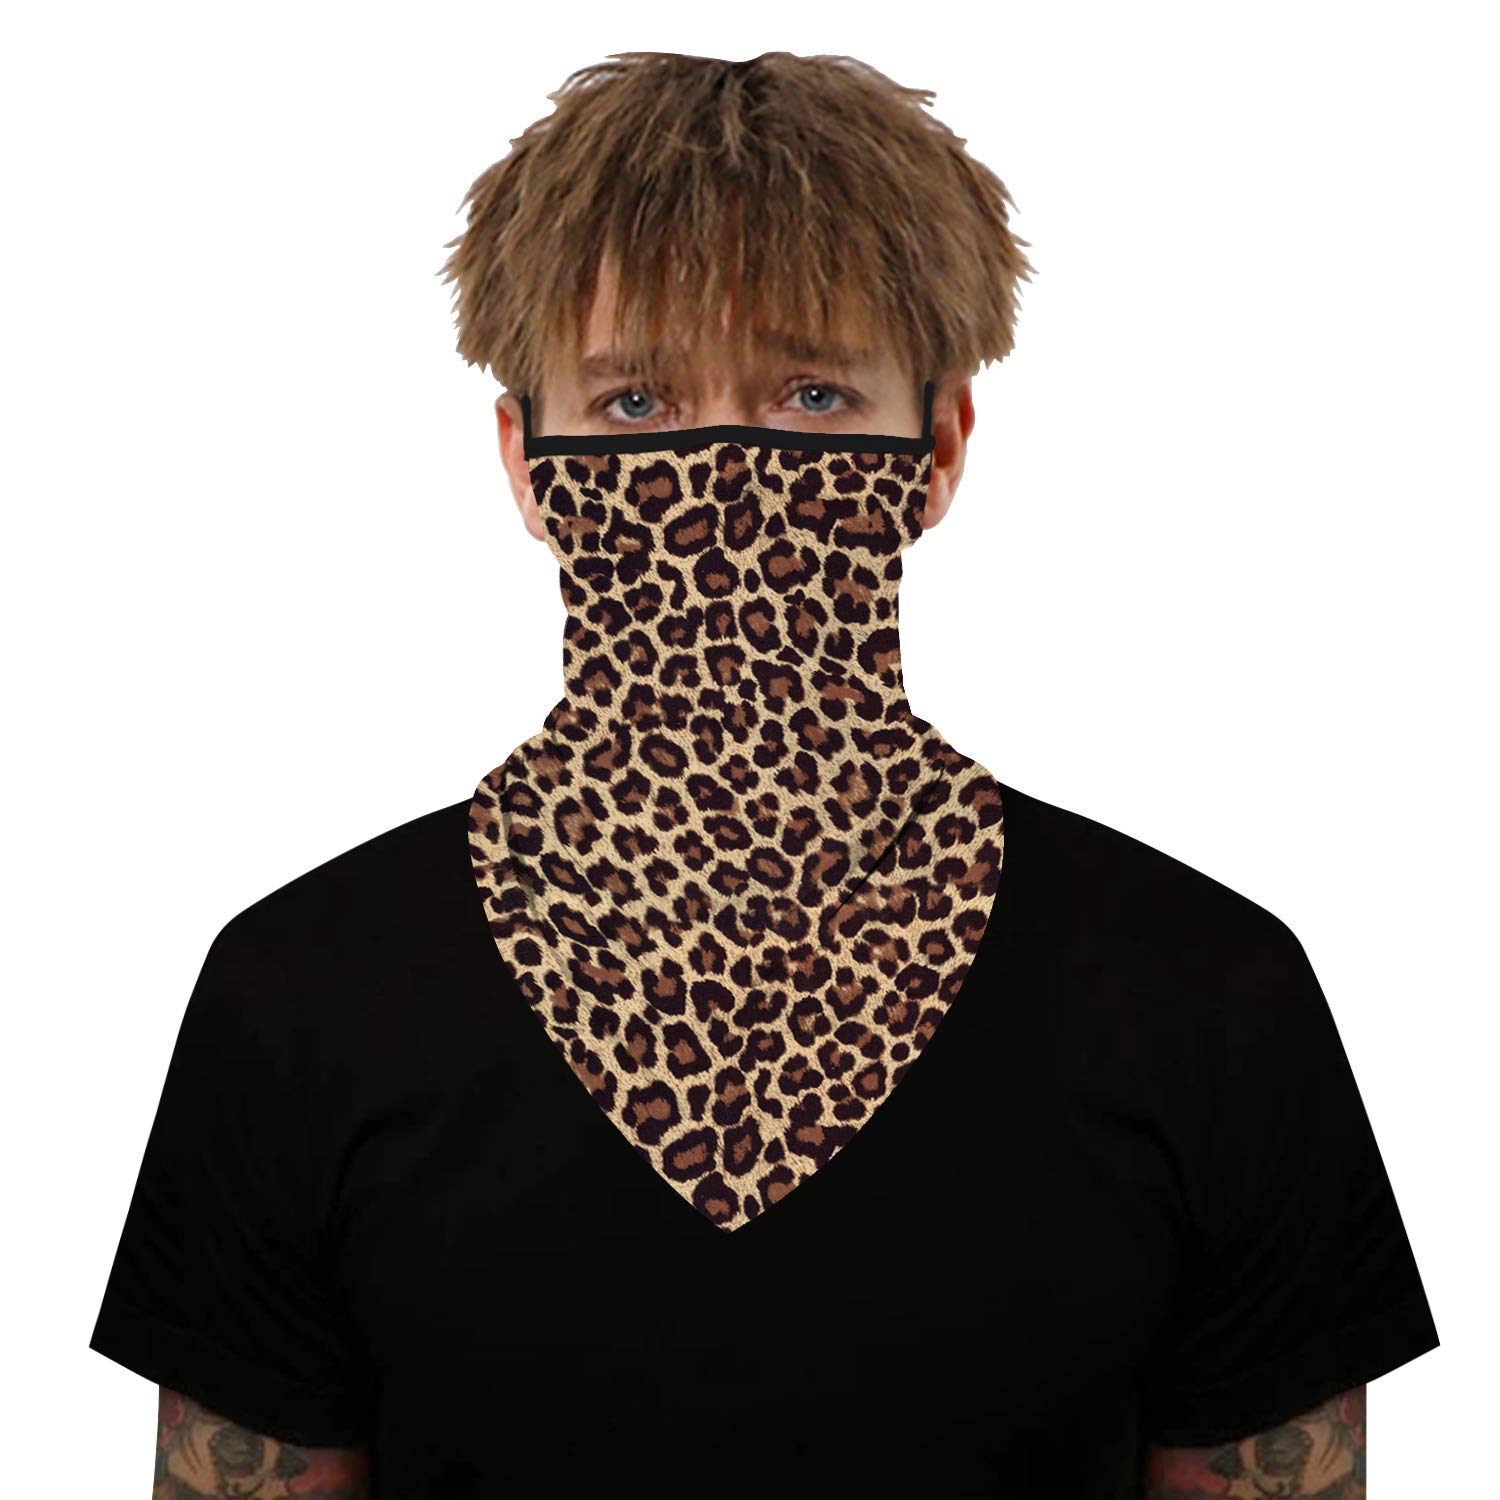 YAYOUREL Fashionable Leopard Neck Gaiter Face Mask Covering Bandanas for Men Women Summer UV Cooling Face Scarf Mask Cover Ear Loop Hole Triangle Facemask Headwear for Fishing Running Cycling Hiking